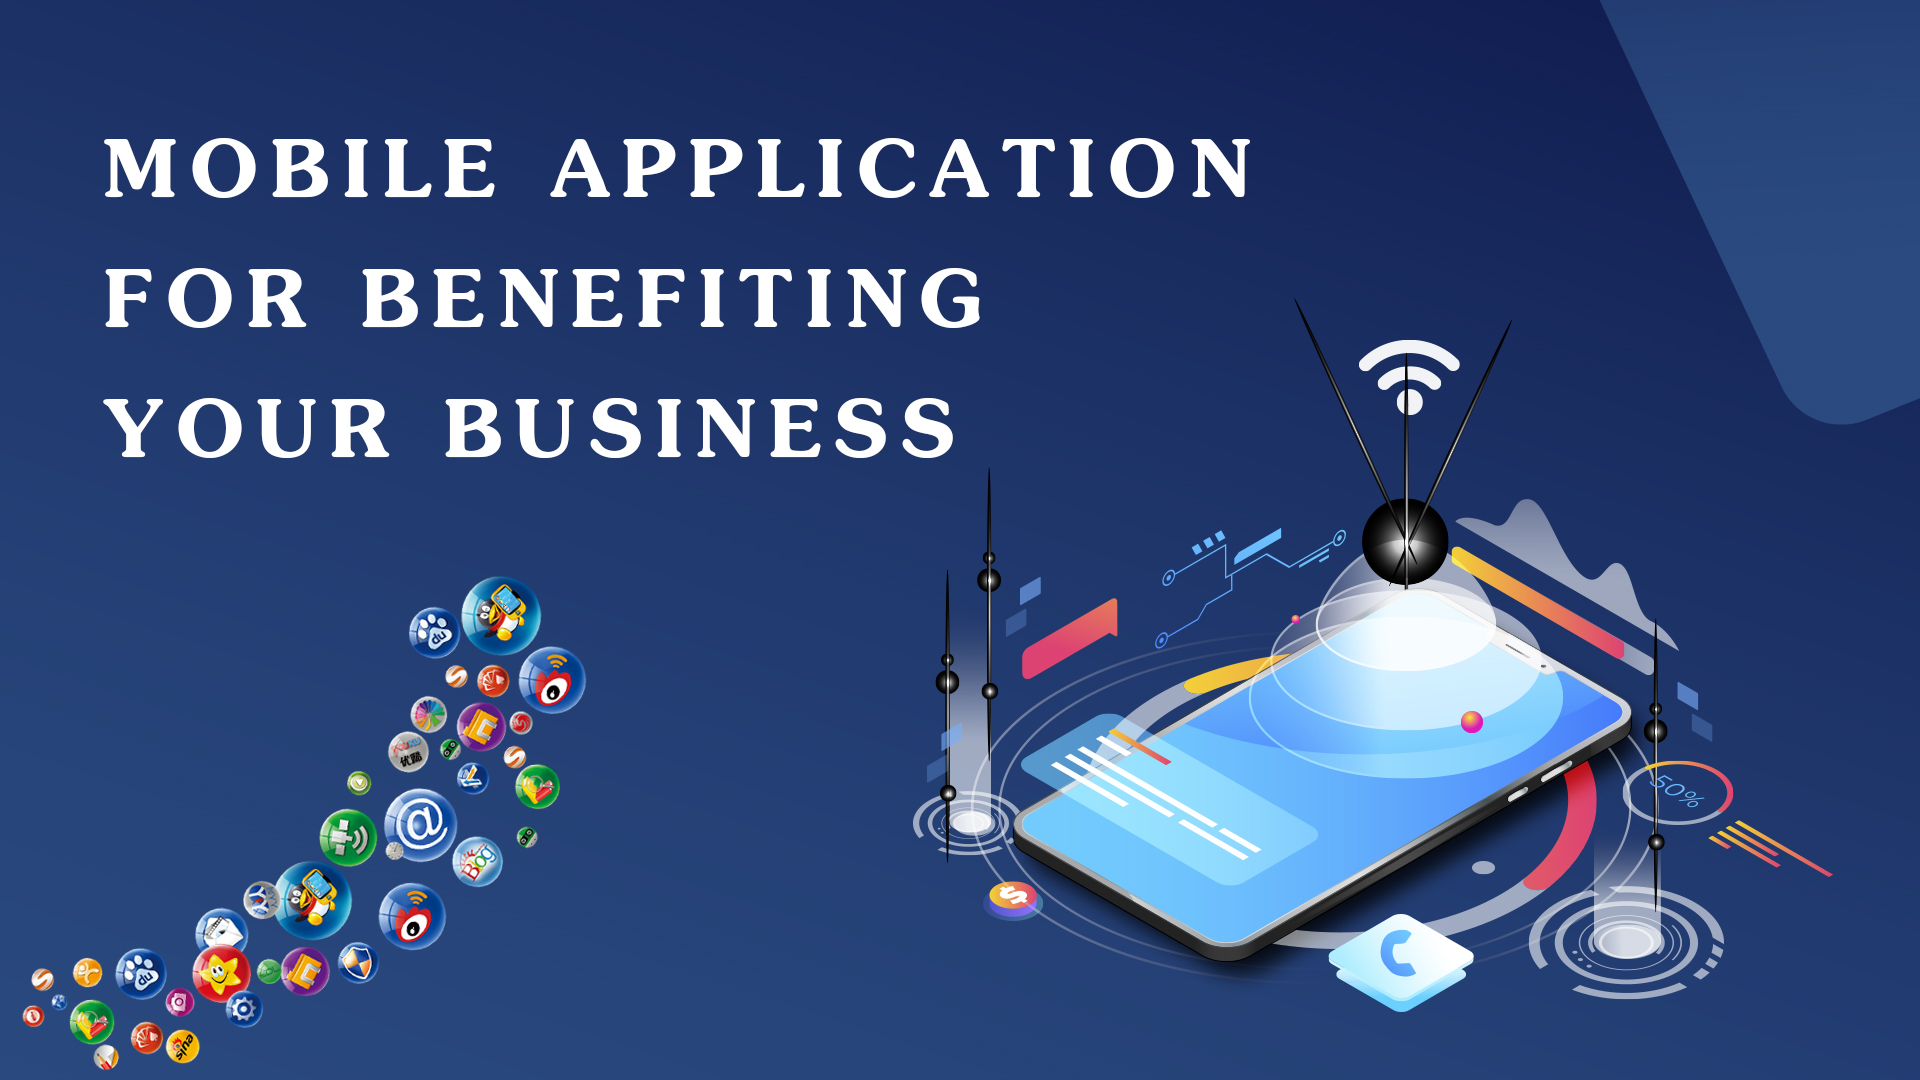 How To Use Mobile Application For Benefiting Your Business